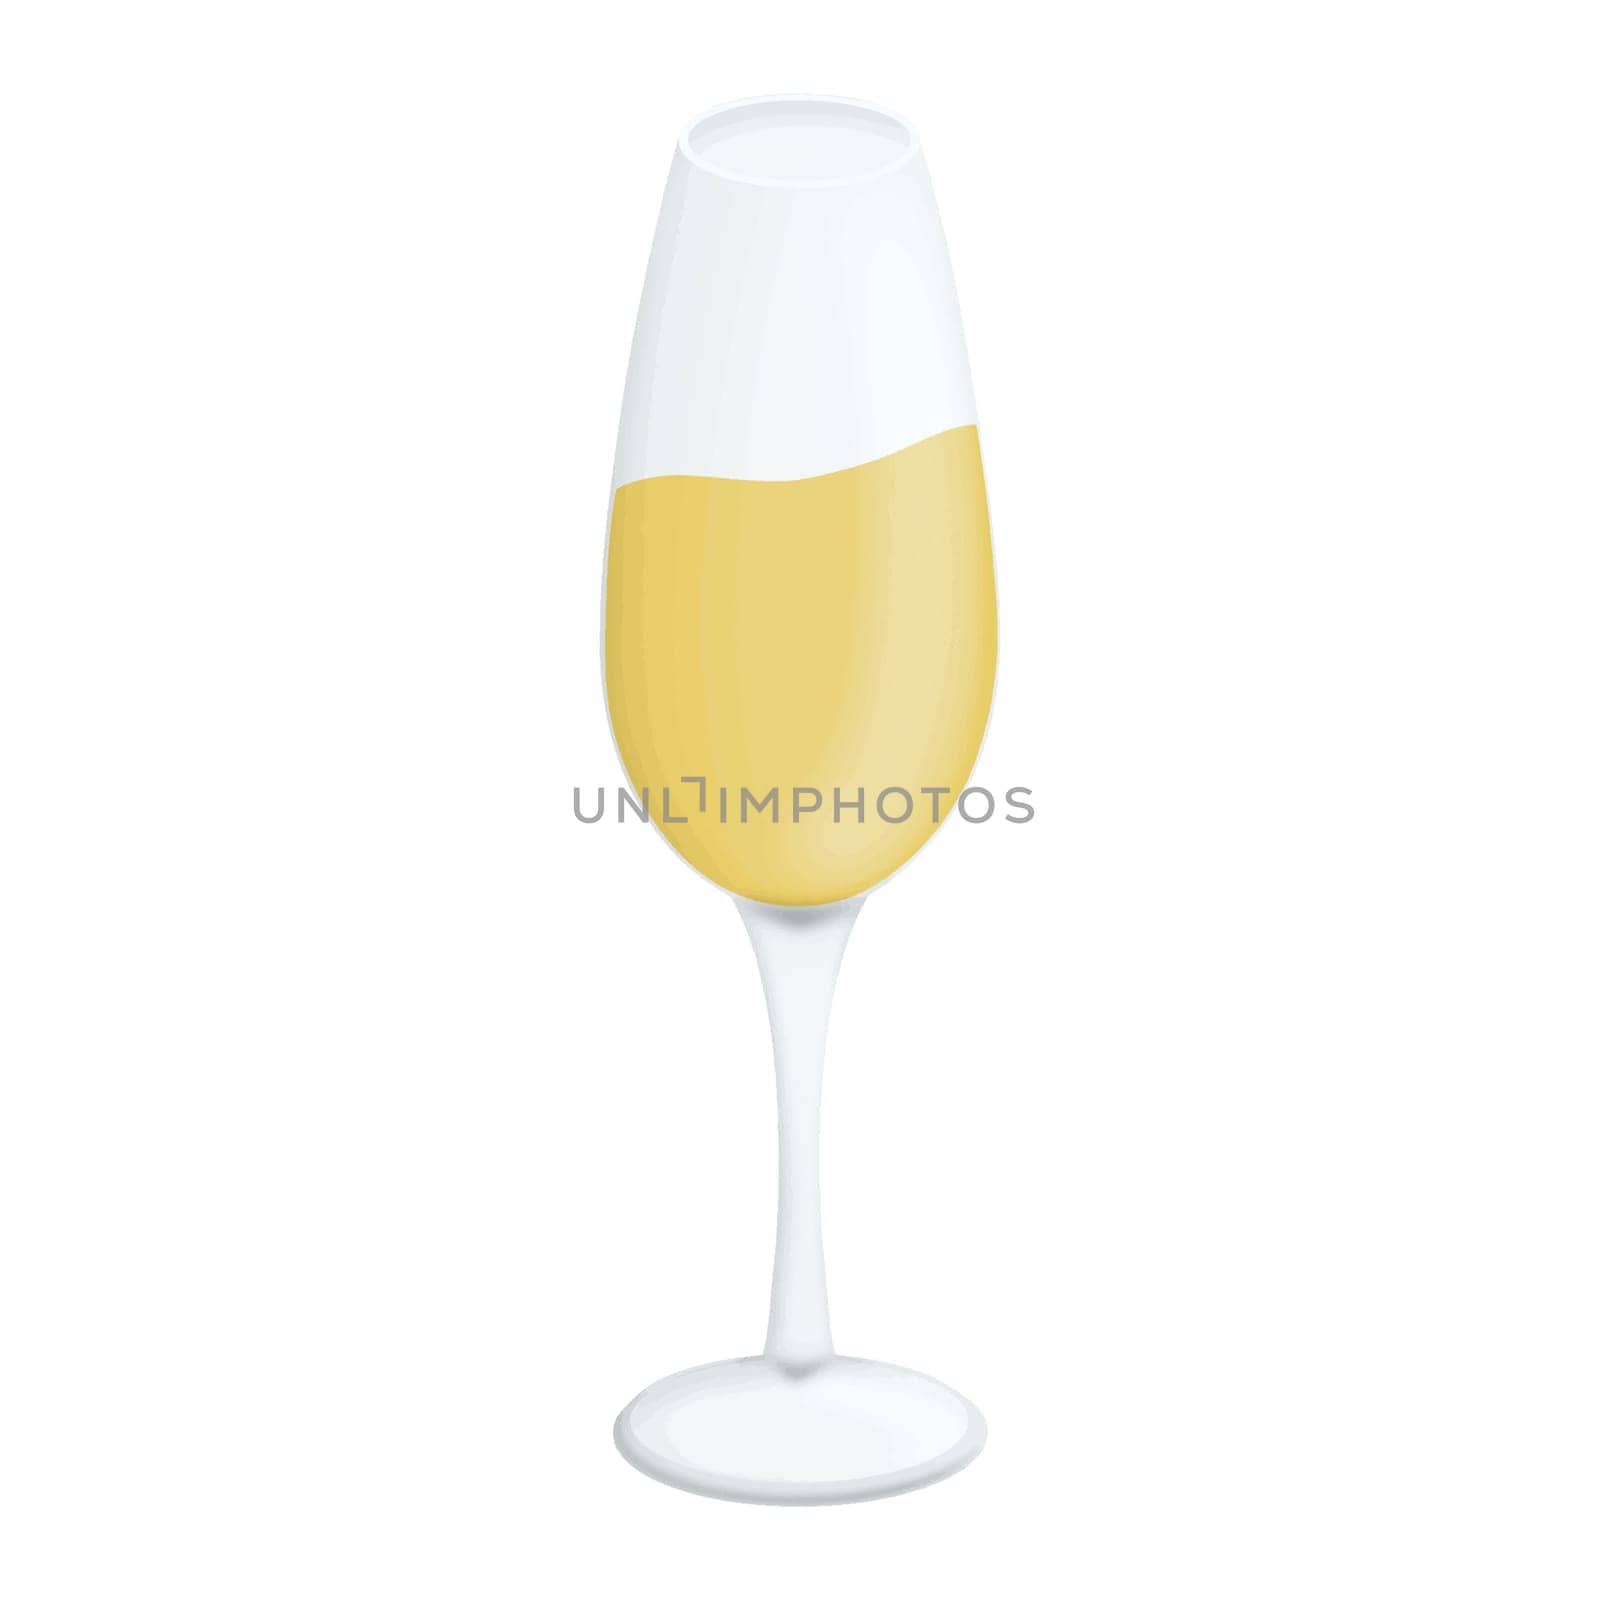 Champagne Glass Party illustration isolated Clipart  by Skyecreativestudio